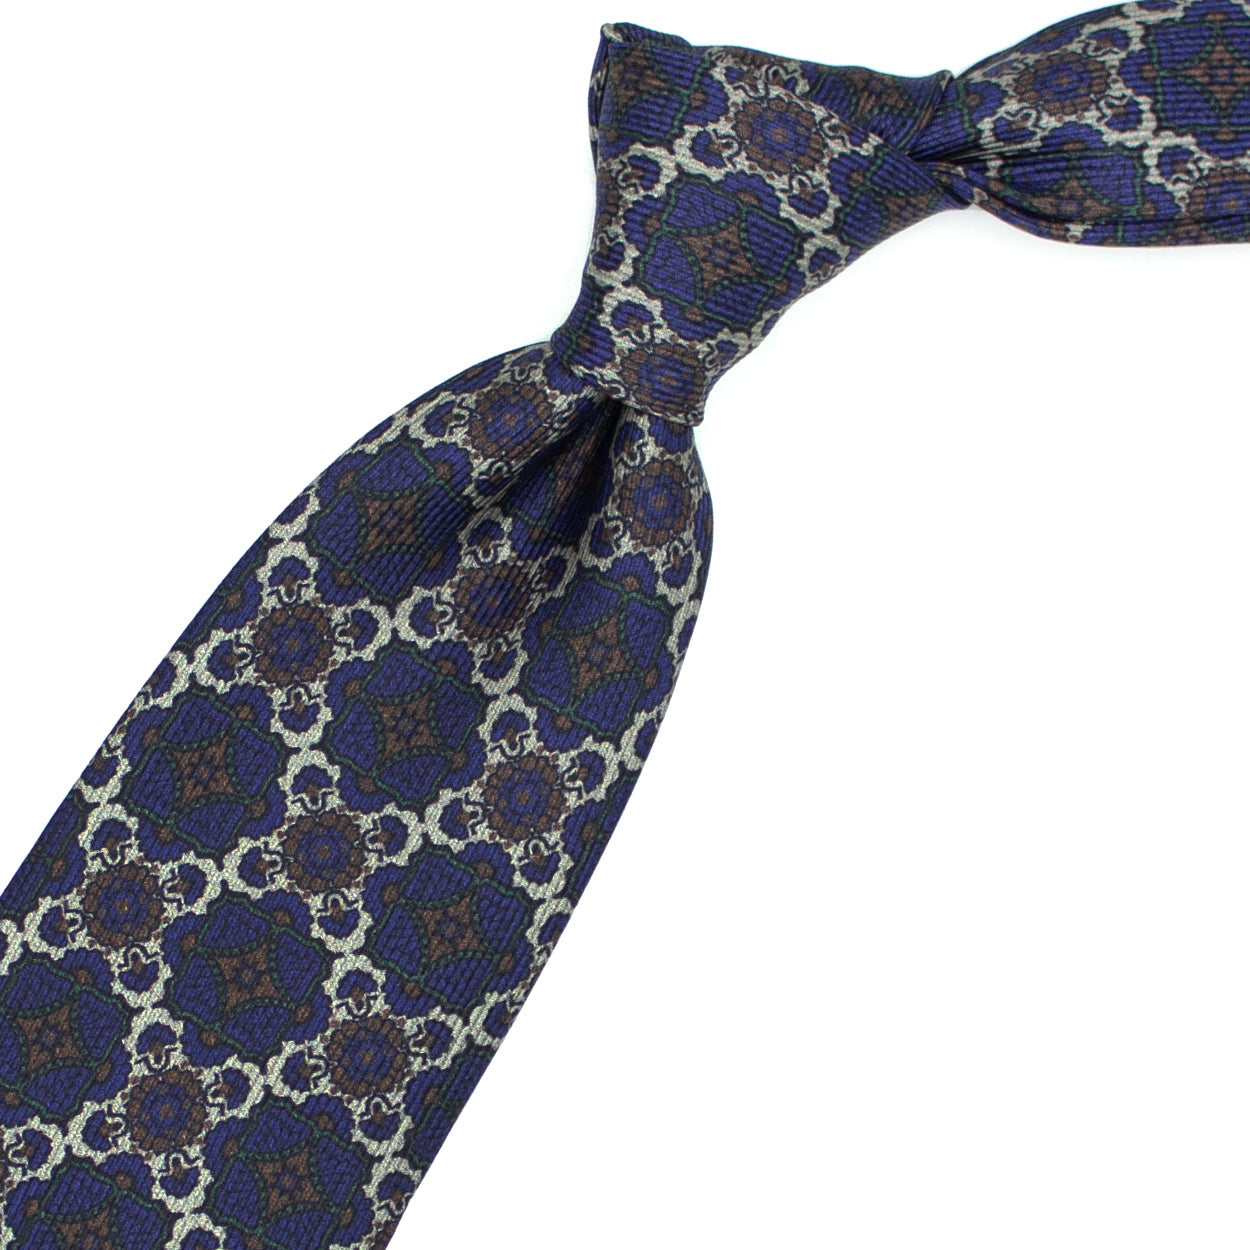 Blue tie with cream and brown medallions